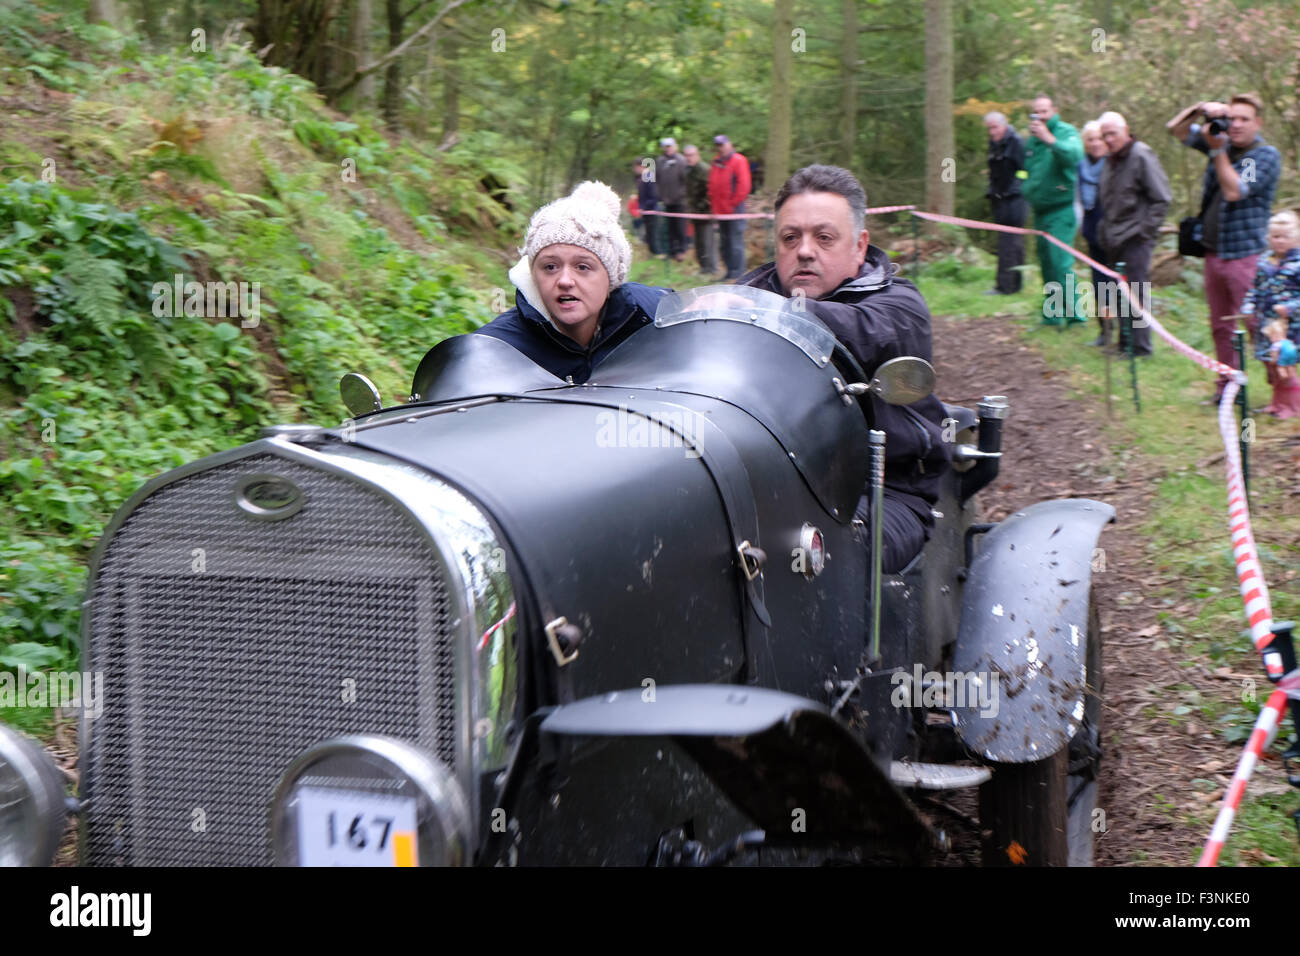 New Radnor, Powys, Wales - Saturday 10th October 2015 - The Vintage Sports Car Club ( VSCC ) hill climb trial challenge on The Smatcher a steep wooded hill just outside New Radnor. Competitors score points the further they drive up the steep hill with 25 points being awarded for reaching the top. The passengers act as 'bouncers' who bounce to help the car grip on the steep sections. Shown here is a 1930 Ford Model 'A' Special. Stock Photo